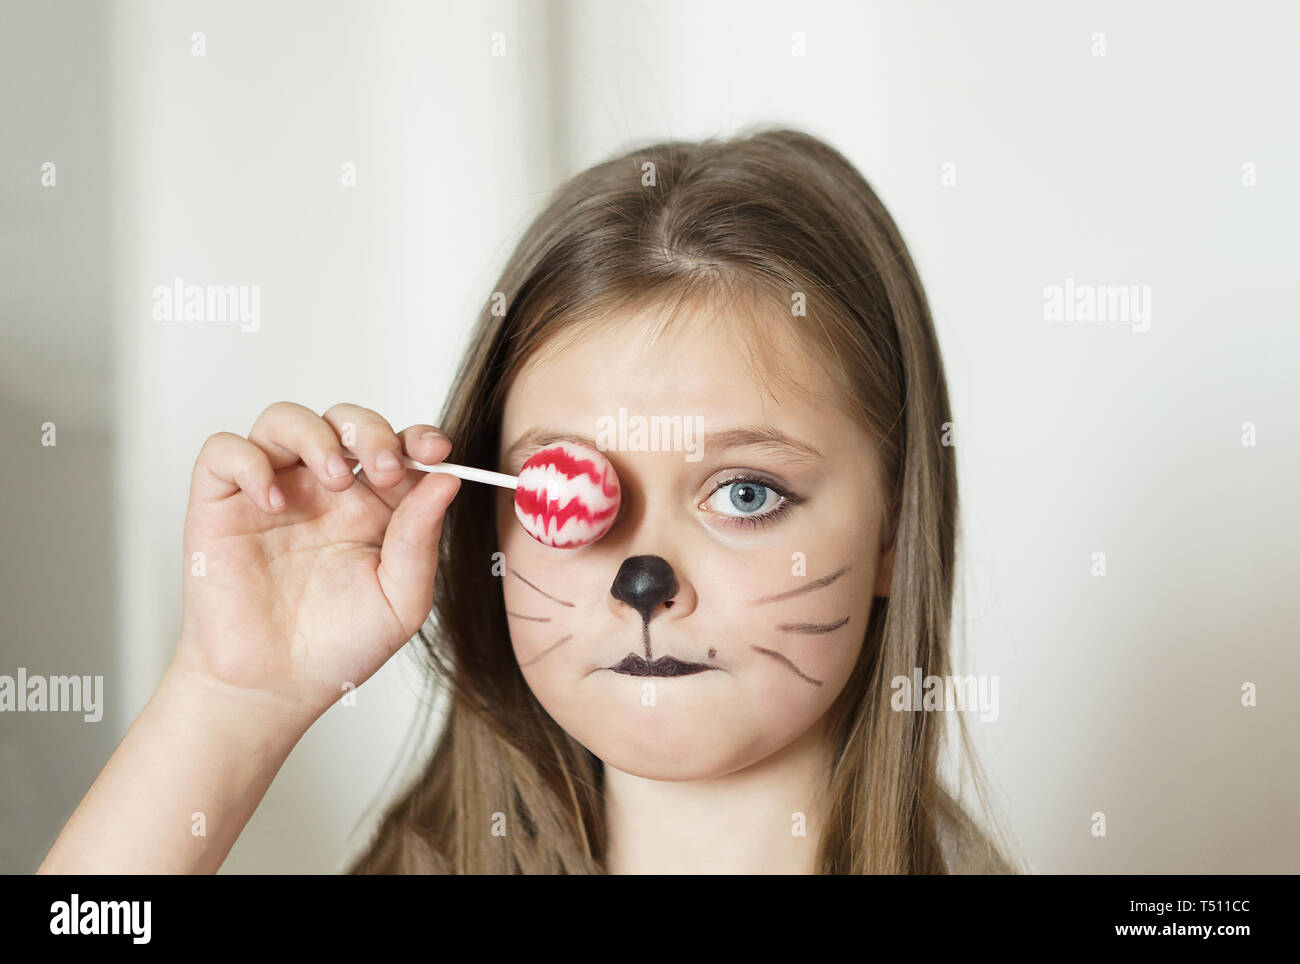 blonde girl with a make-up imitating a cat holds in her hand a chupa chups. Stock Photo